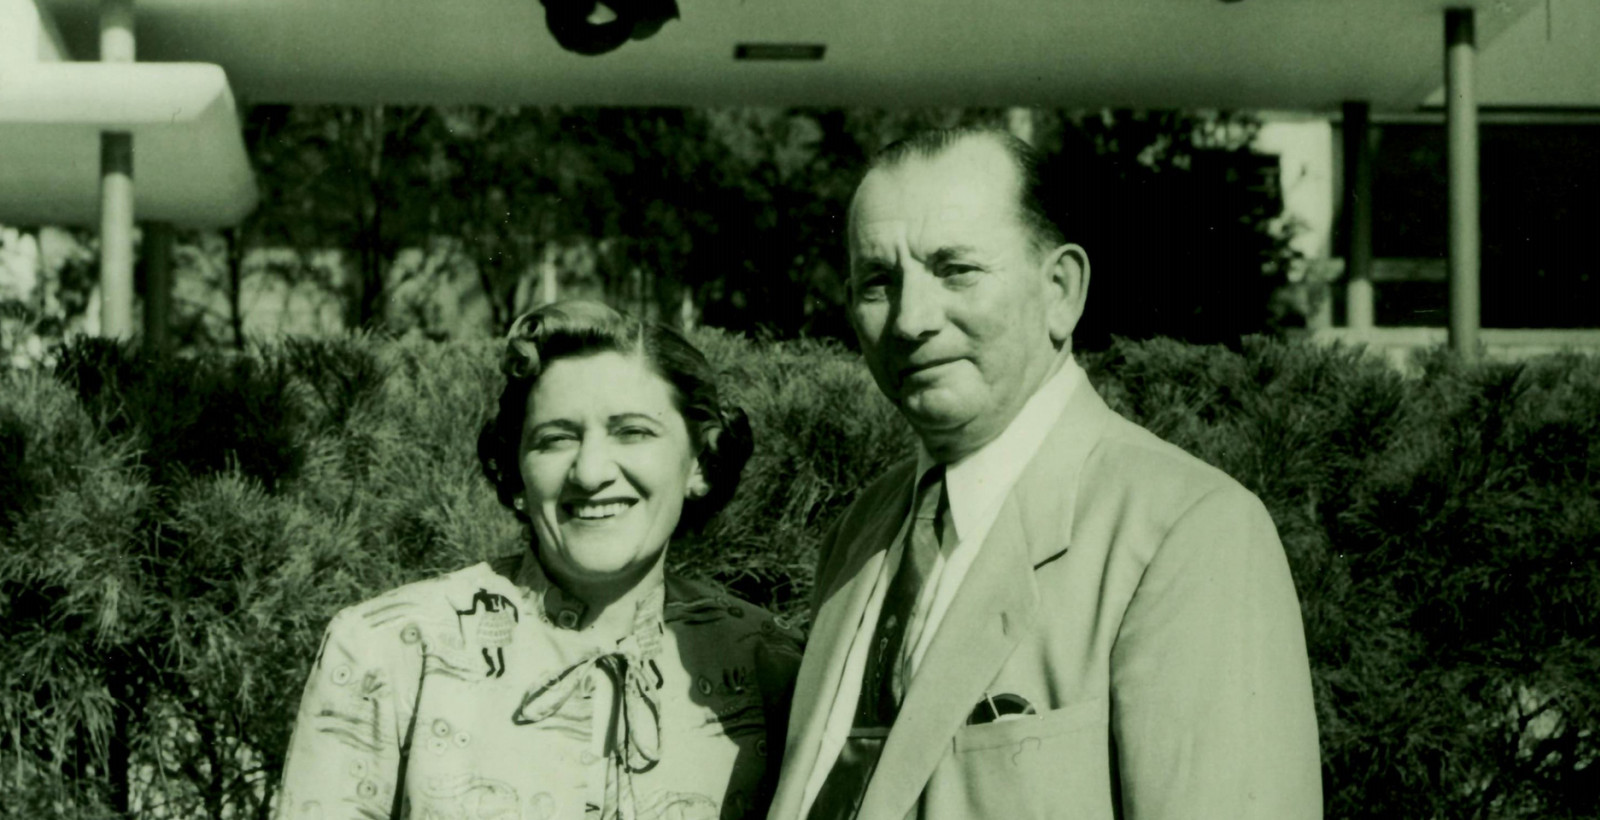 Solomon and Evelyn Tollman